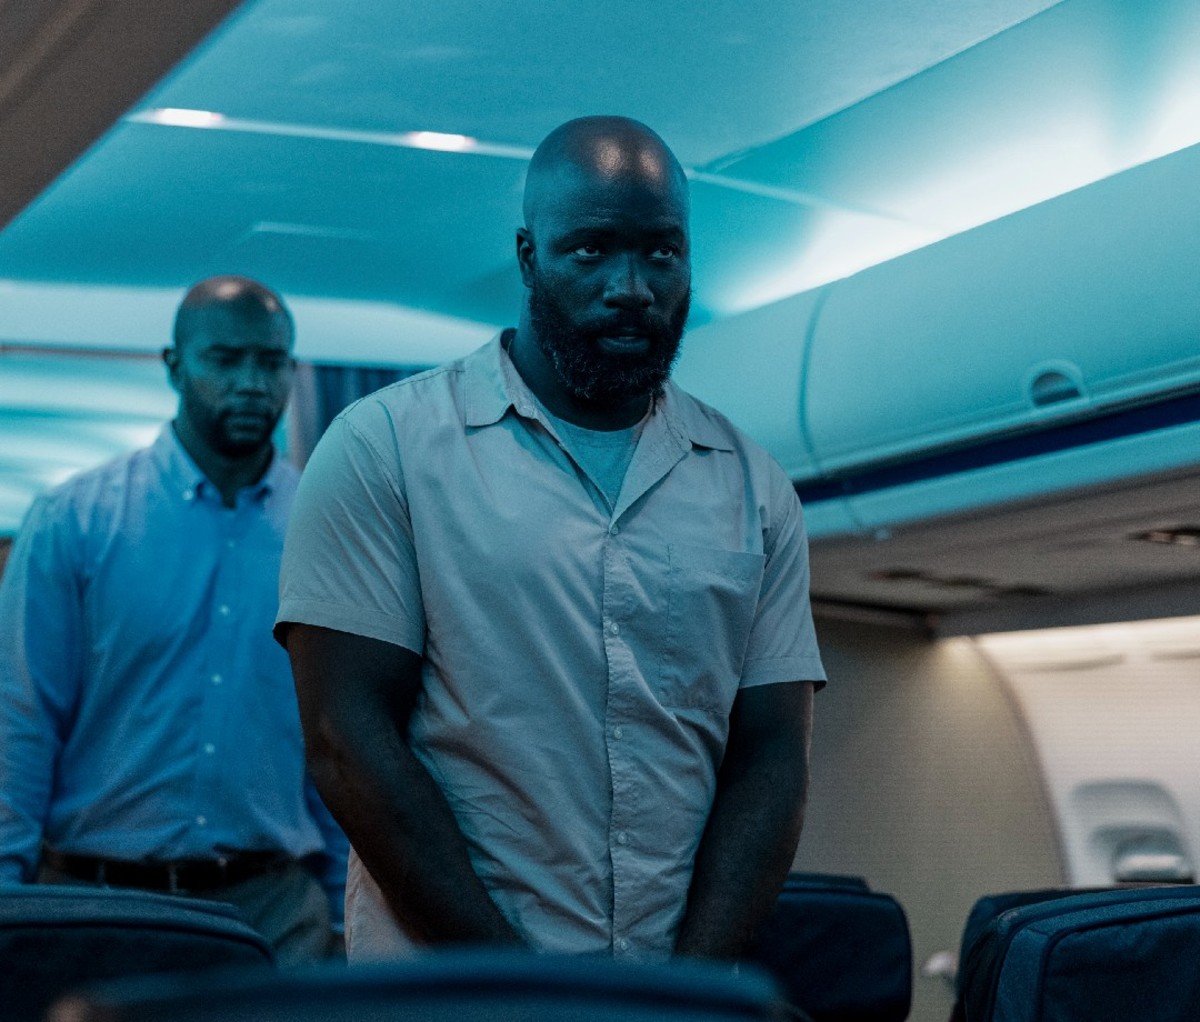 Actor Mike Colter on a plane during a scene from the movie 'Plane'.